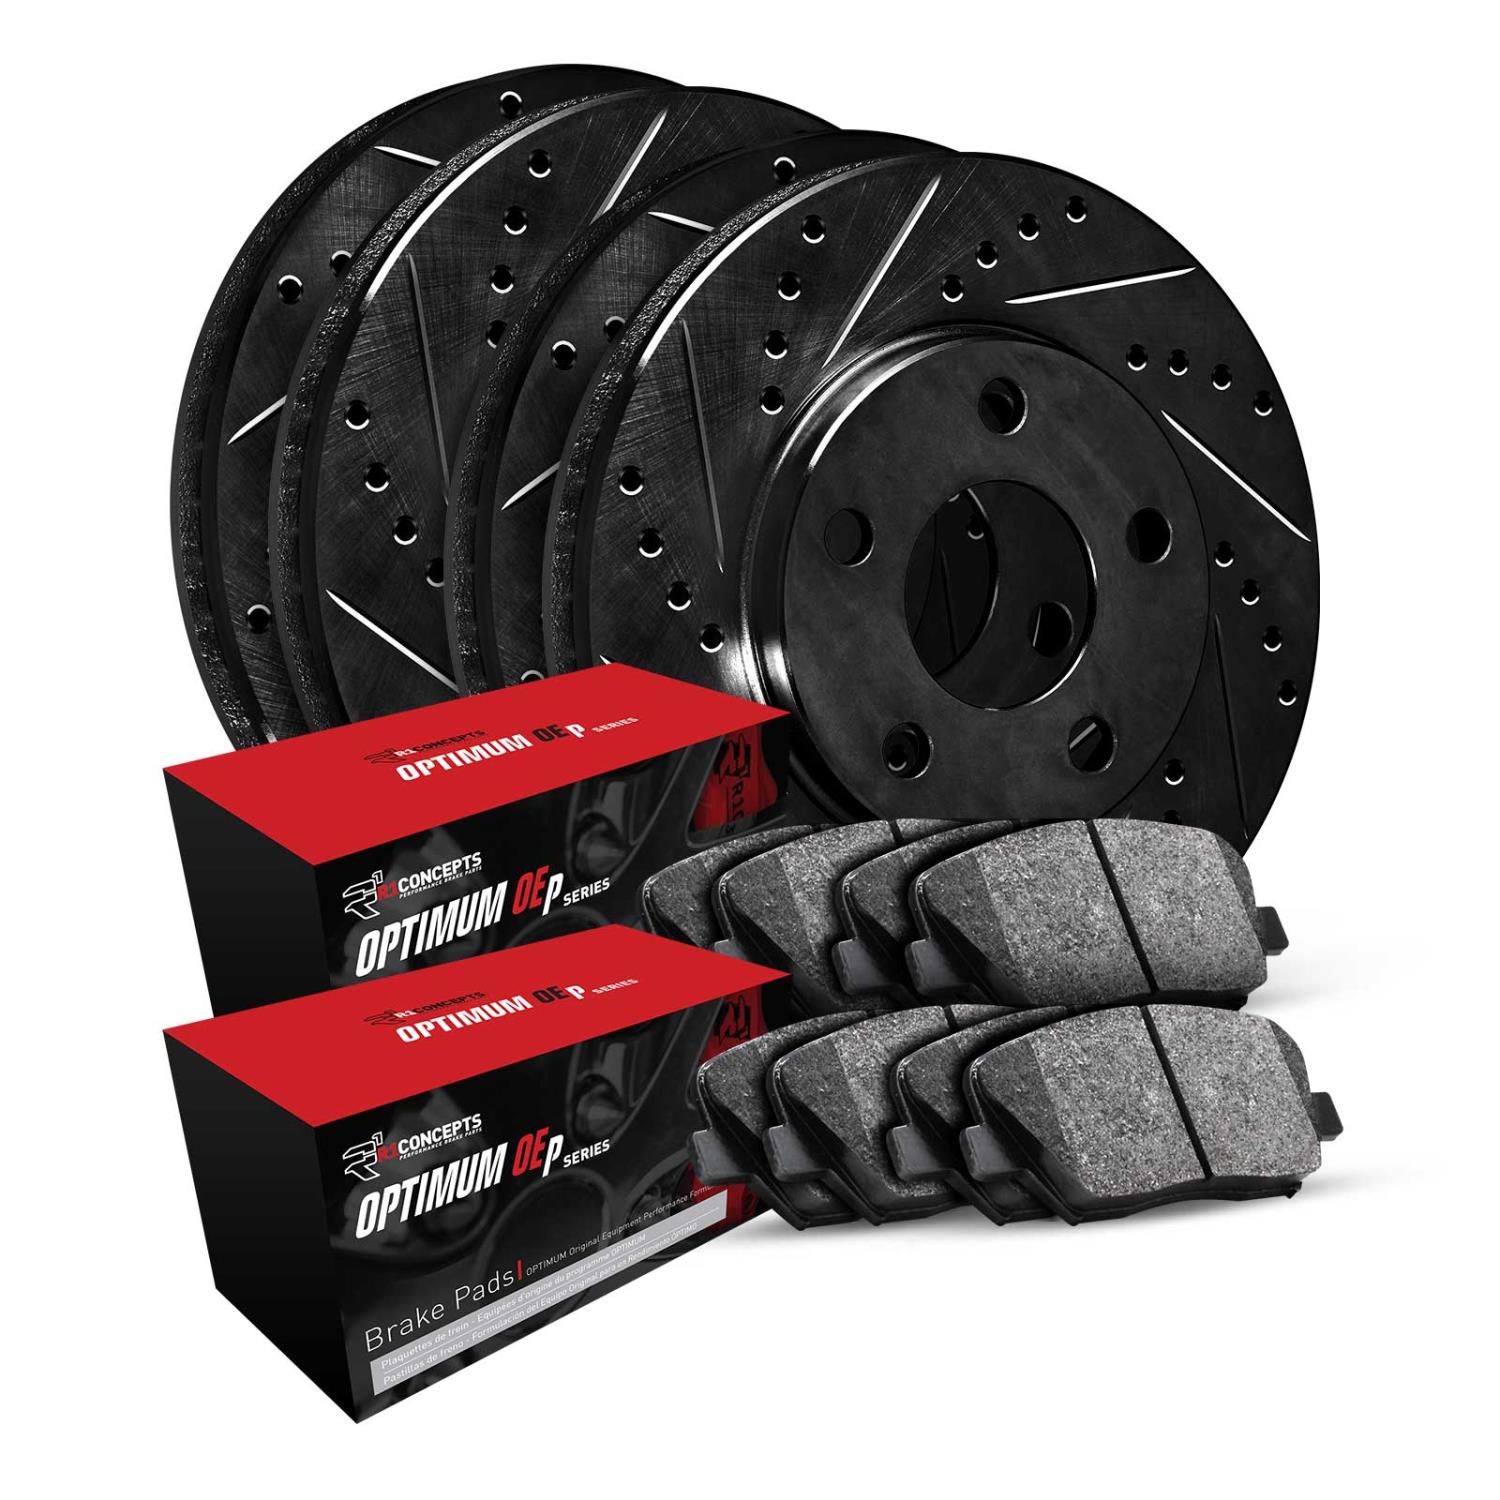 E-Line Drilled & Slotted Black Brake Rotor & Drum Set w/Optimum OE Pads & Shoes, 1992-1995 Fits Multiple Makes/Models